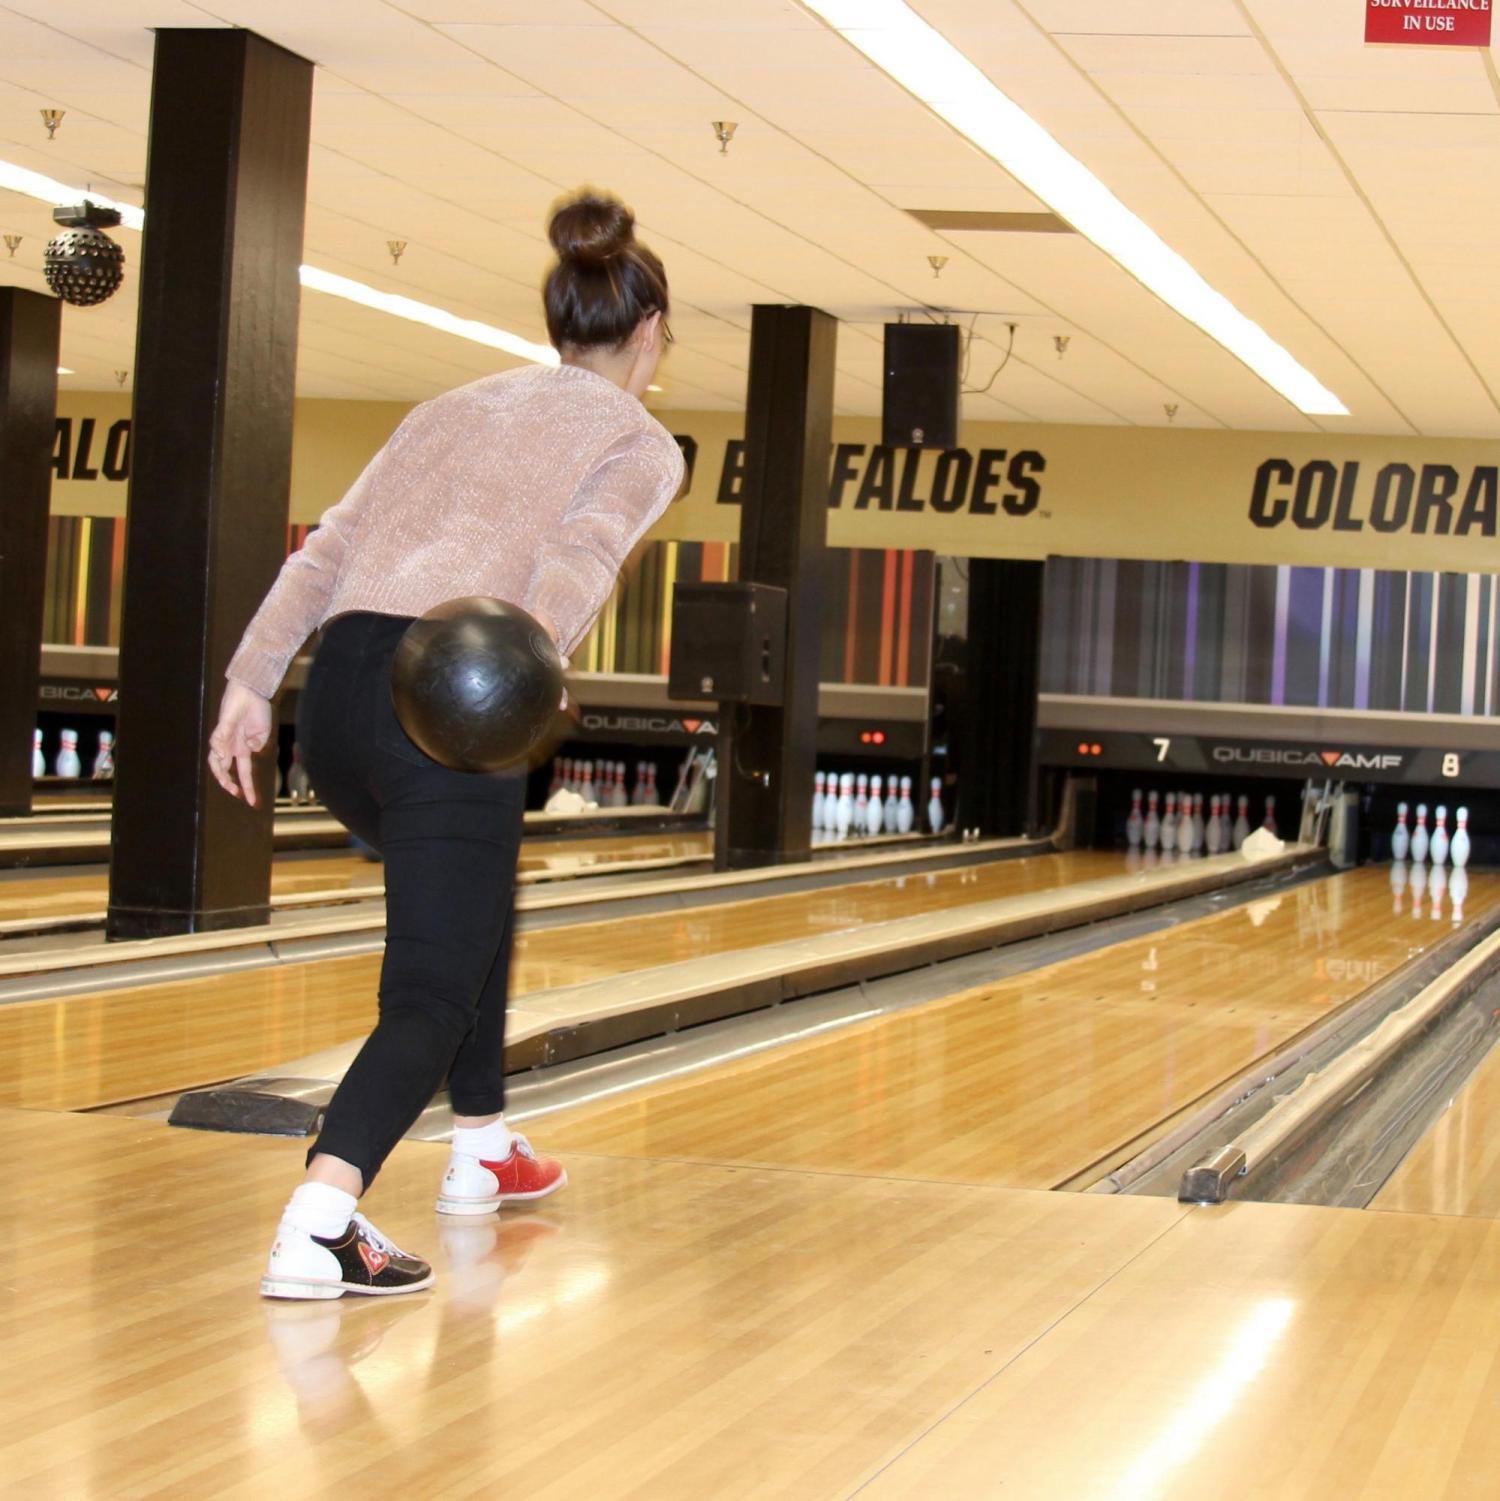 Student bowling at event